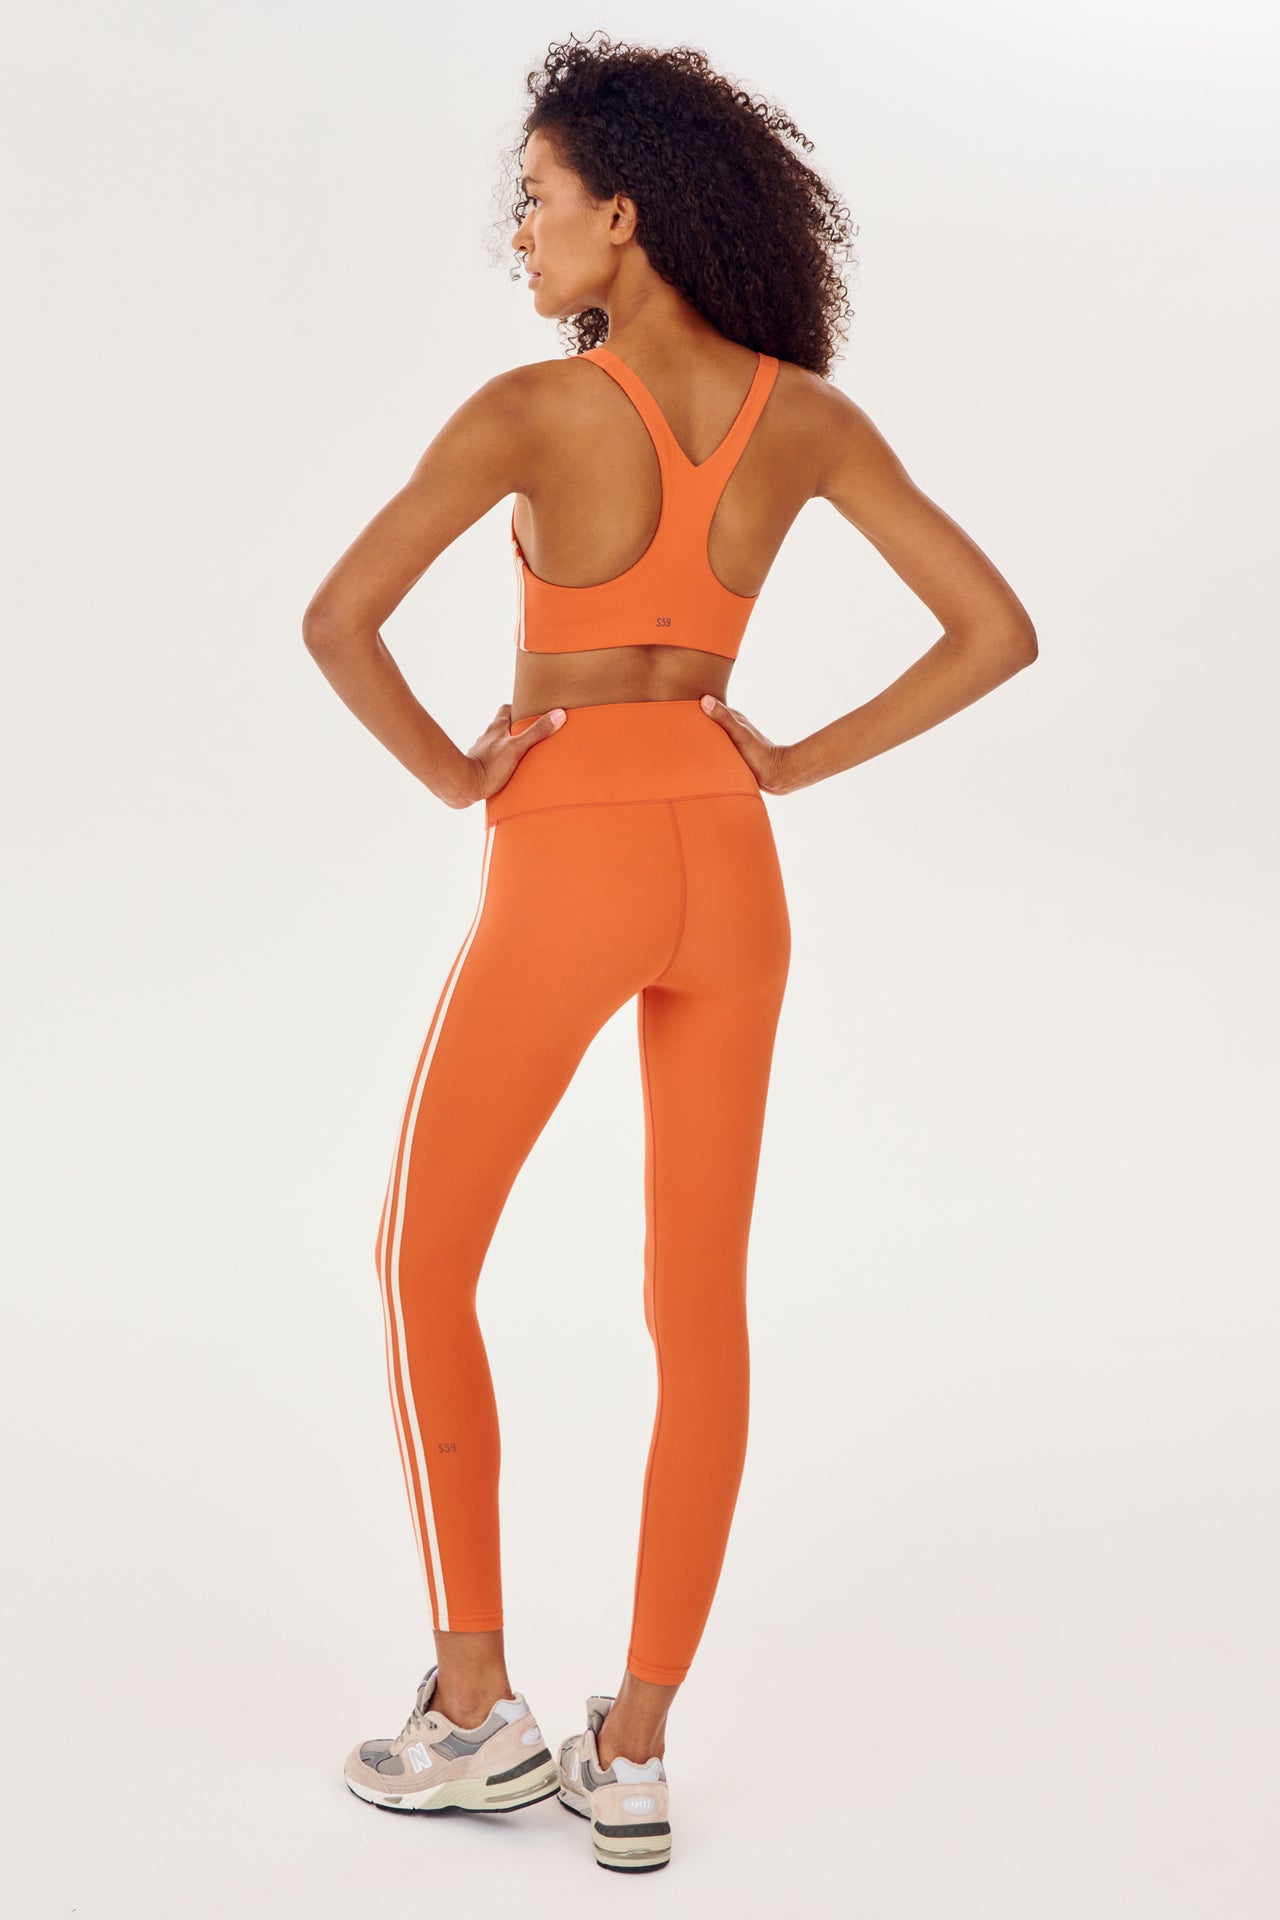 Full back view of girl wearing orange sports bra with two thin white stripes  down the side and orange leggings with white shoes